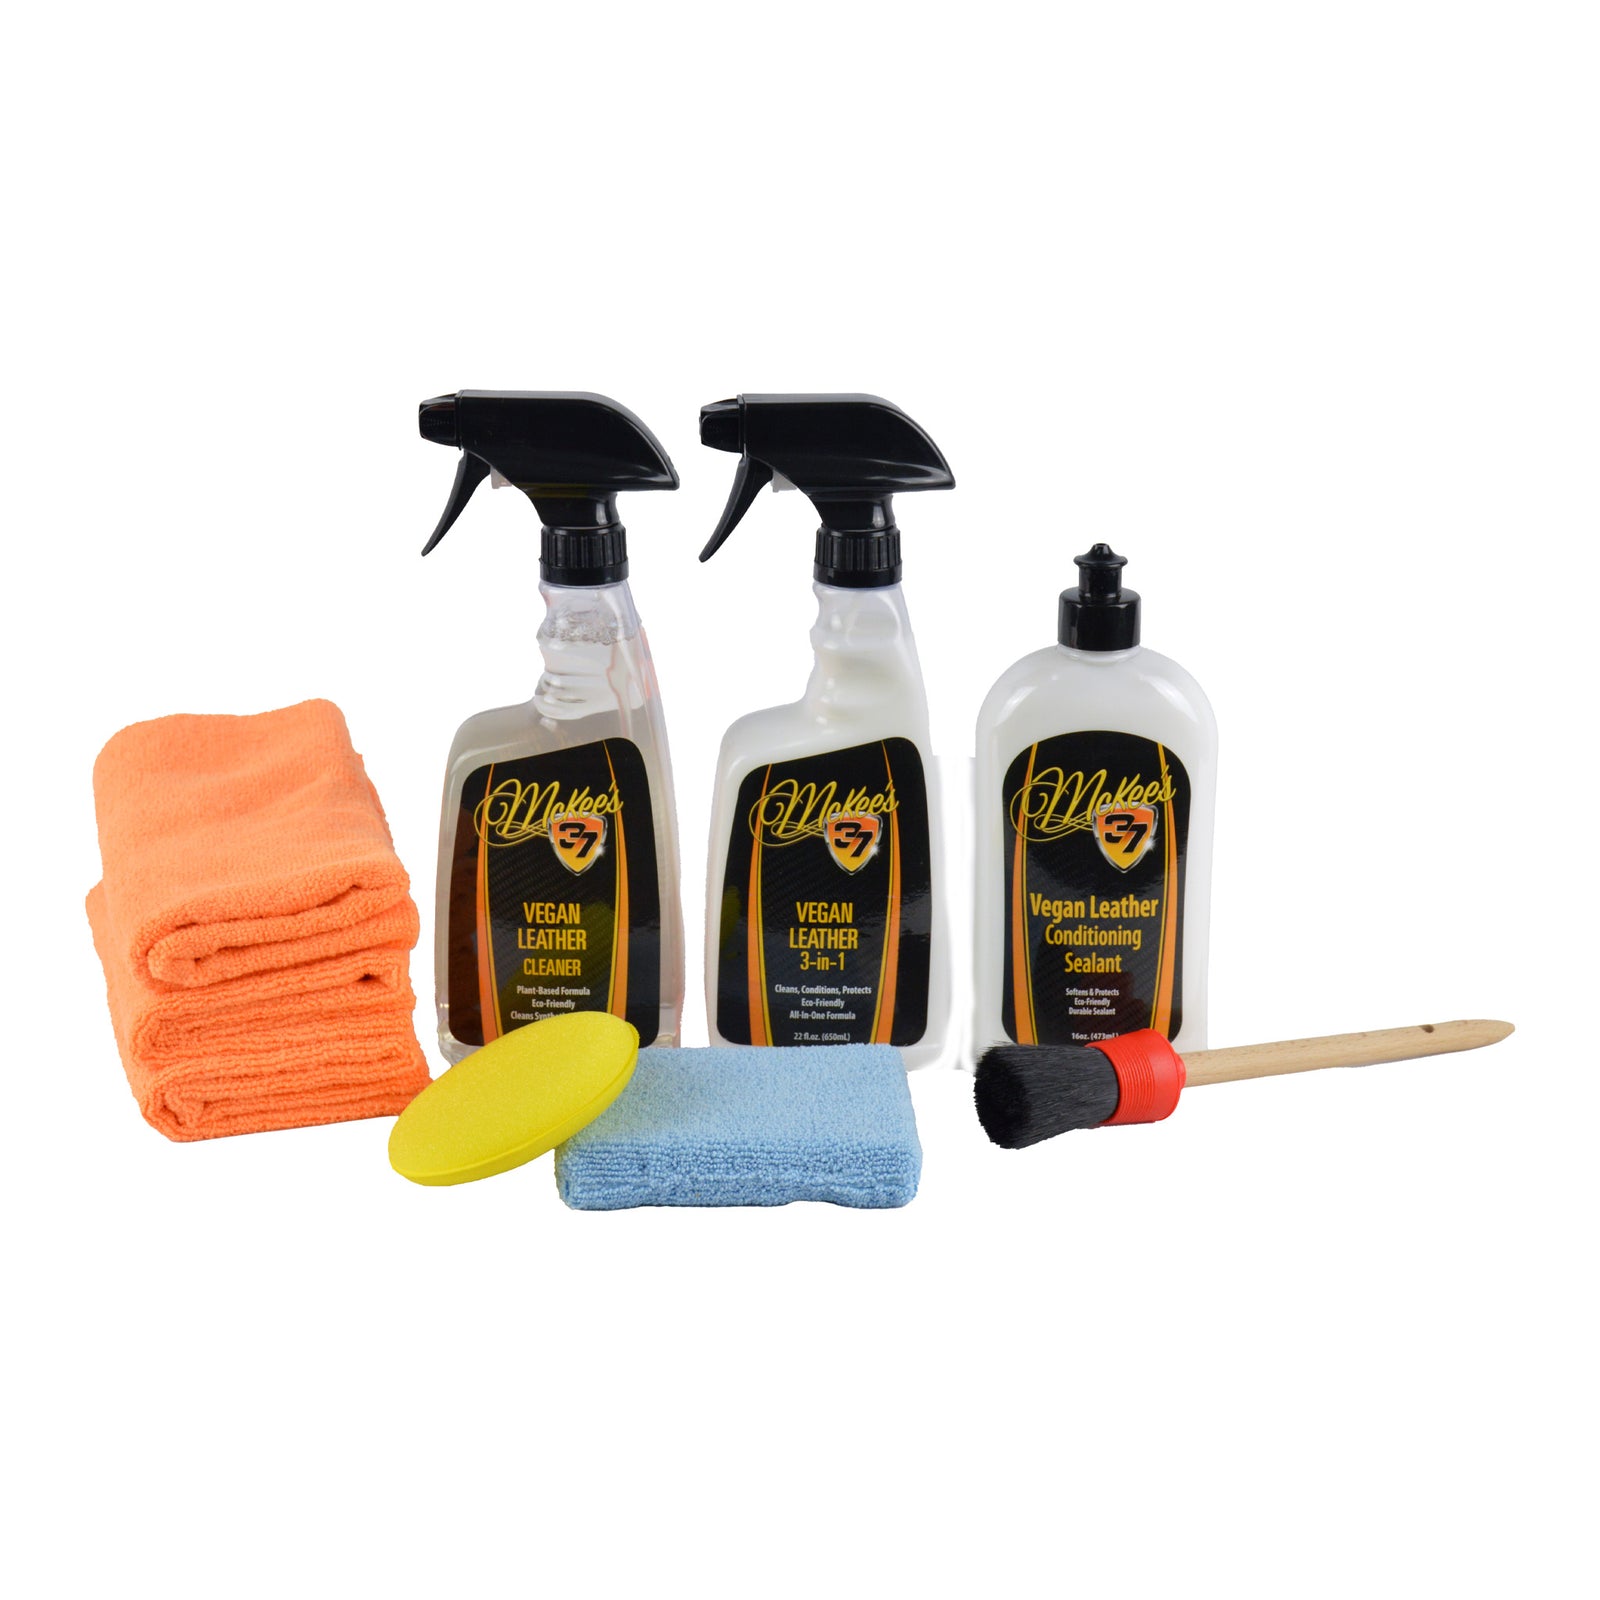 All-In-One Car Leather Care